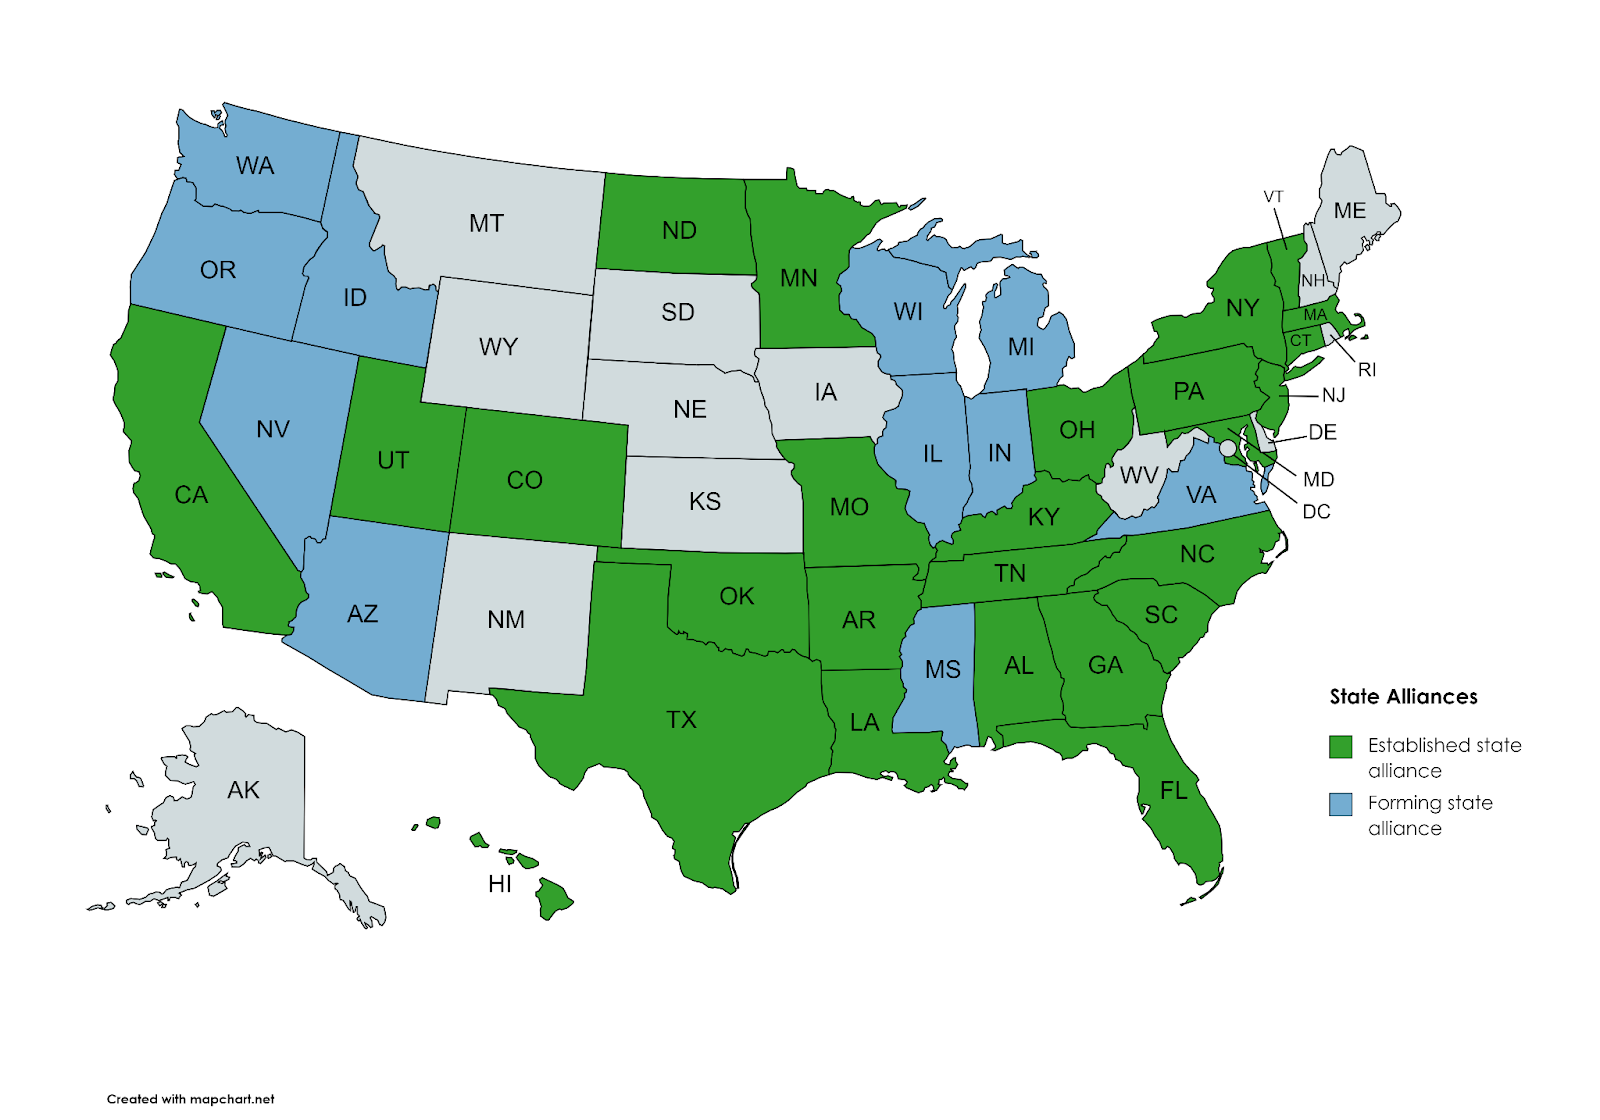 Map of the United States.In green are the states with established state alliances (VT, MA, CT, NY, NJ, PA, MD, OH, KY NC, TN, SC, GA, AL, FL, LA, AR, MO, MN, ND, OK, TX, CO, UT, CA & HI)In blue are the states forming state alliances (WA, OR, ID, NV, AZ, WI, MI, IL, IN, MS, & VA).In gray, states that have not yet established a state alliance (ME, NH, DE, DC, IA, SD, NE, KS, MT, WY, NM, AK)